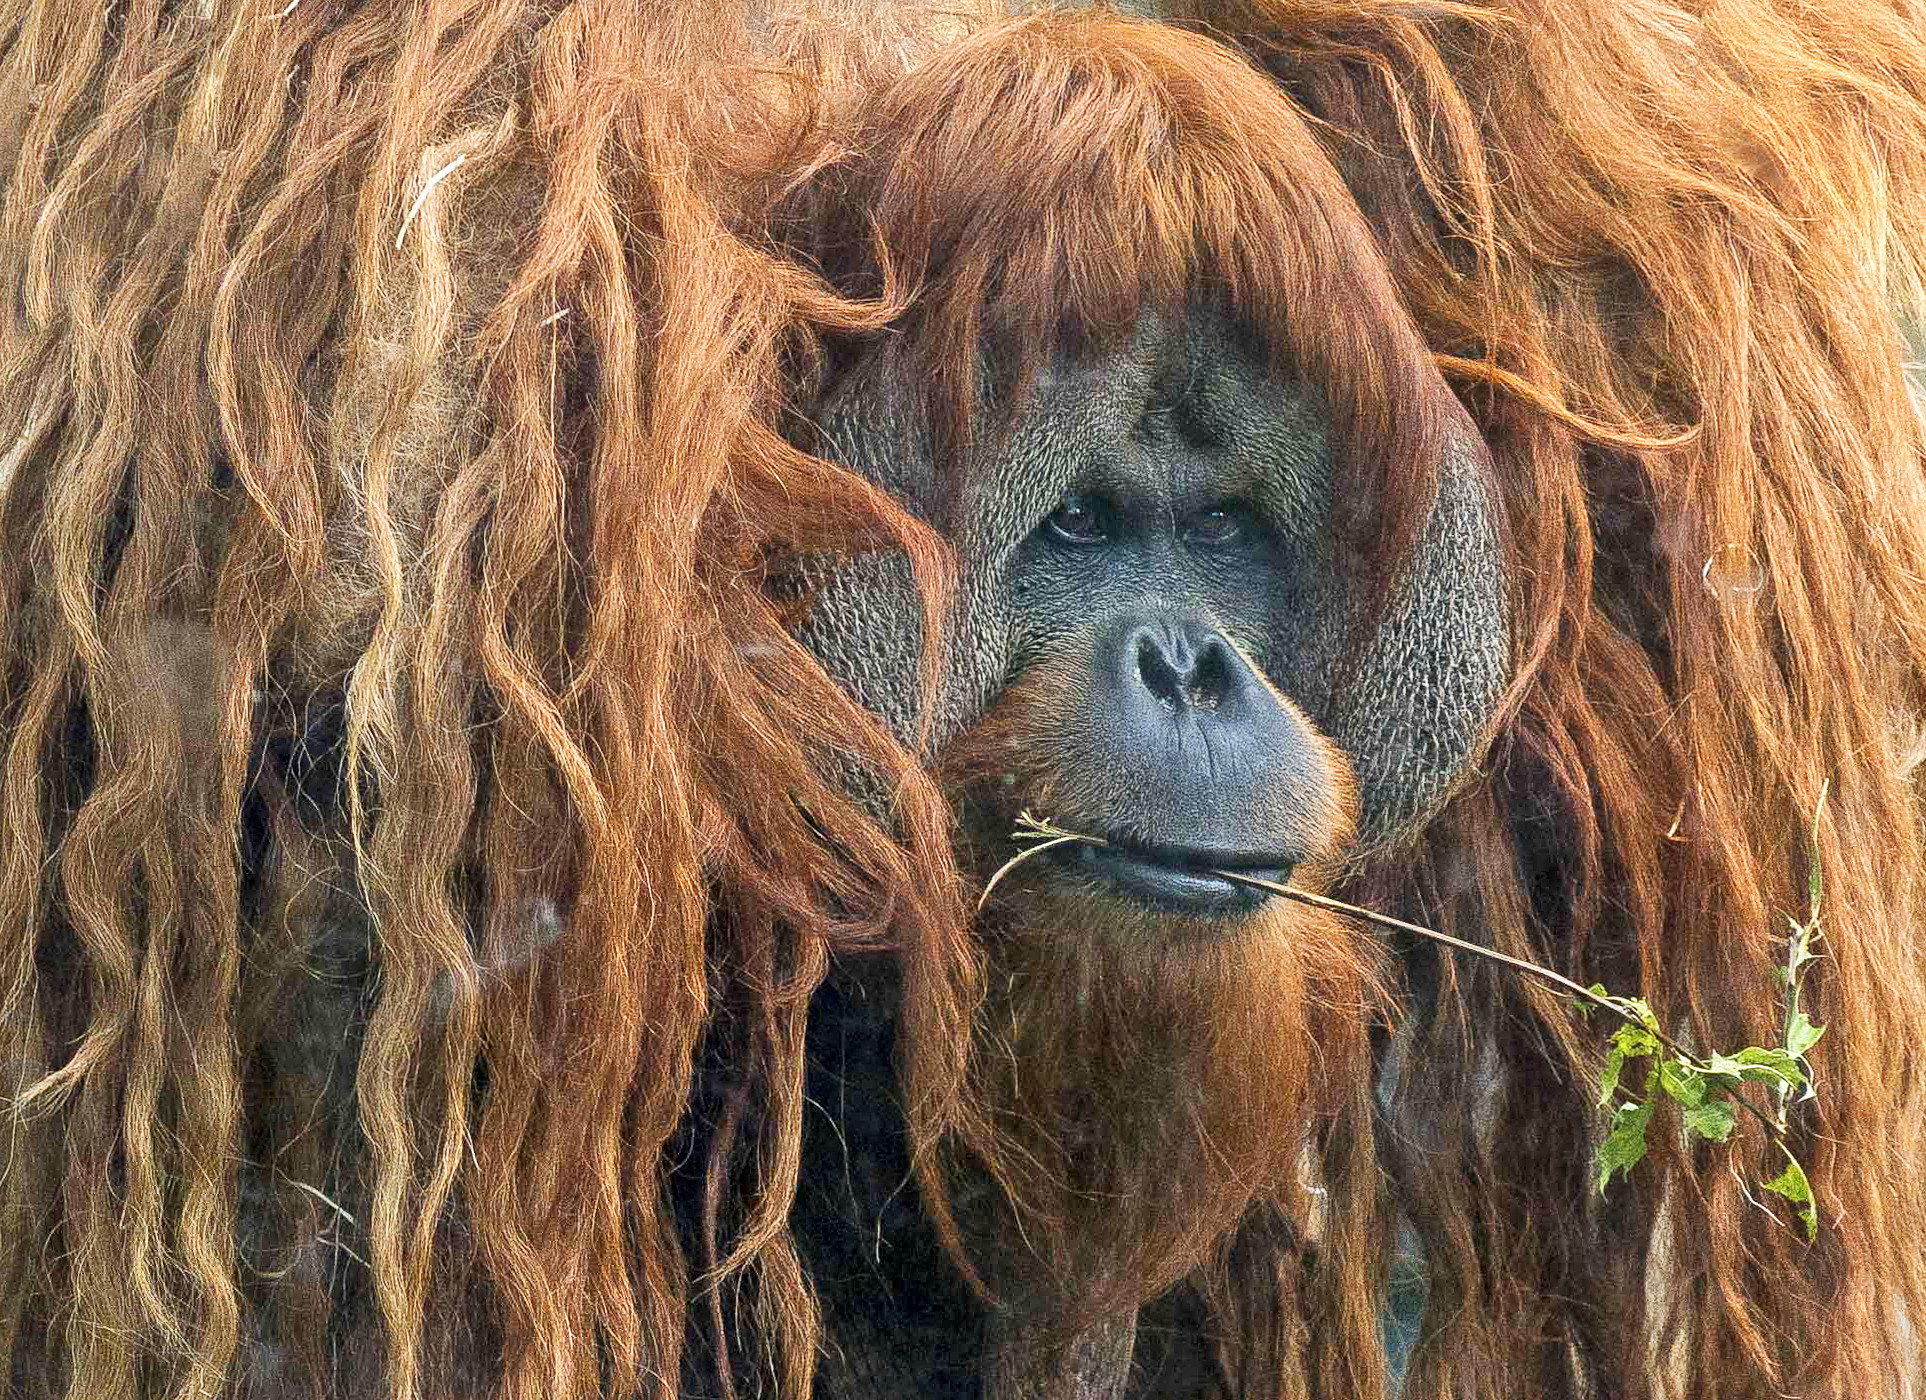 A male orangutan with the characteristic cheek bulges of a dominant animal